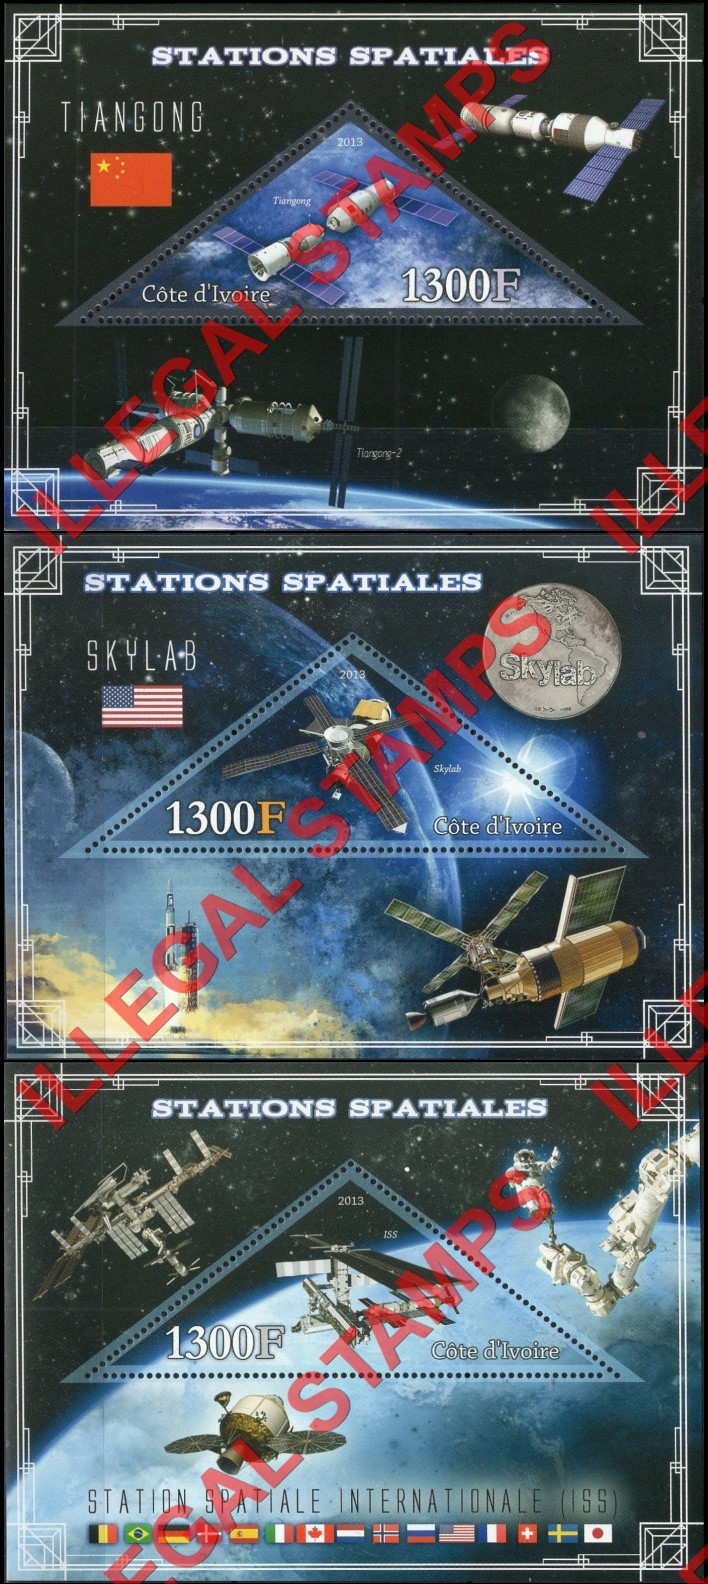 Ivory Coast 2013 Space Stations Illegal Stamp Souvenir Sheets of 1 (Part 1)